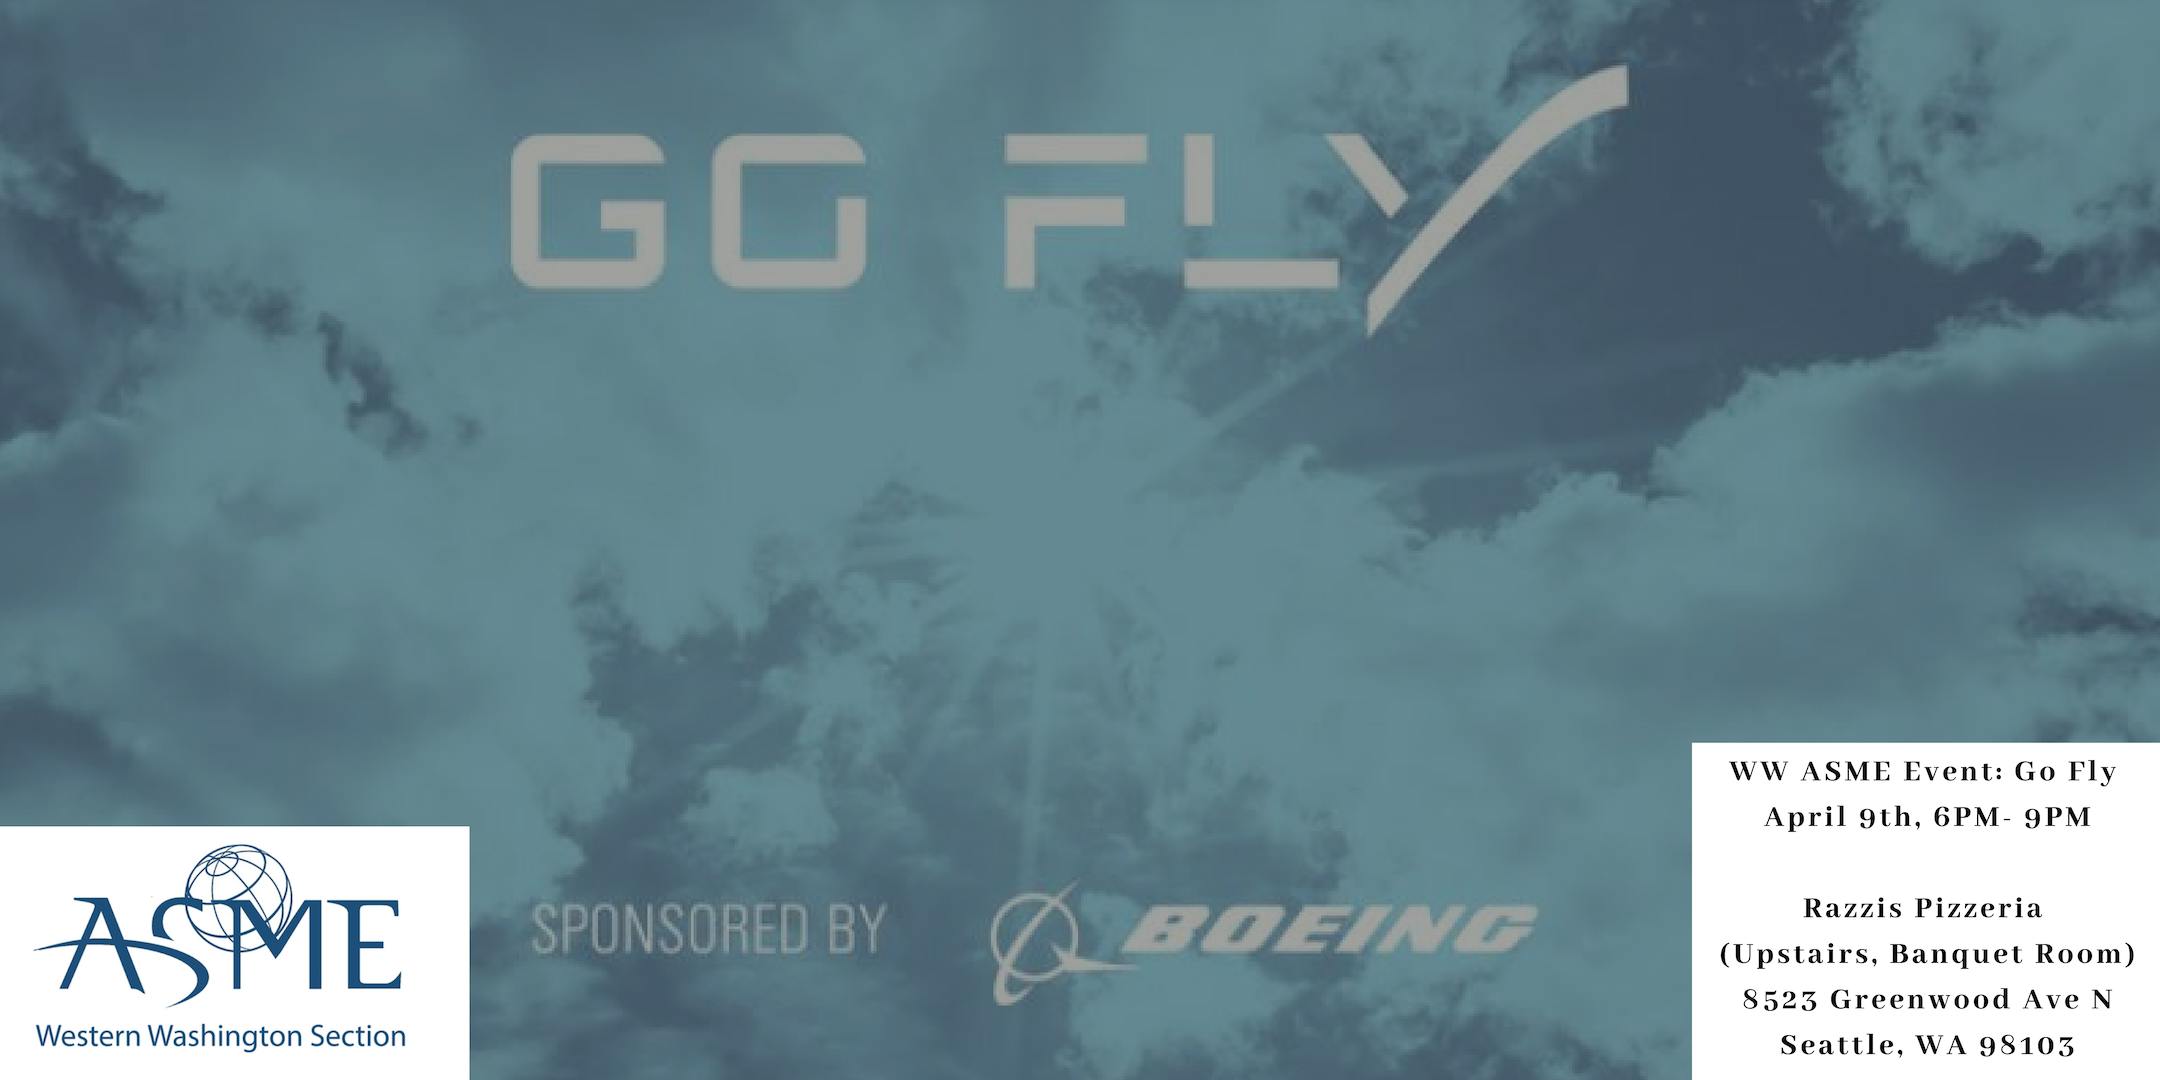 WW ASME Event: Go Fly Prize, updates and more, April 9th